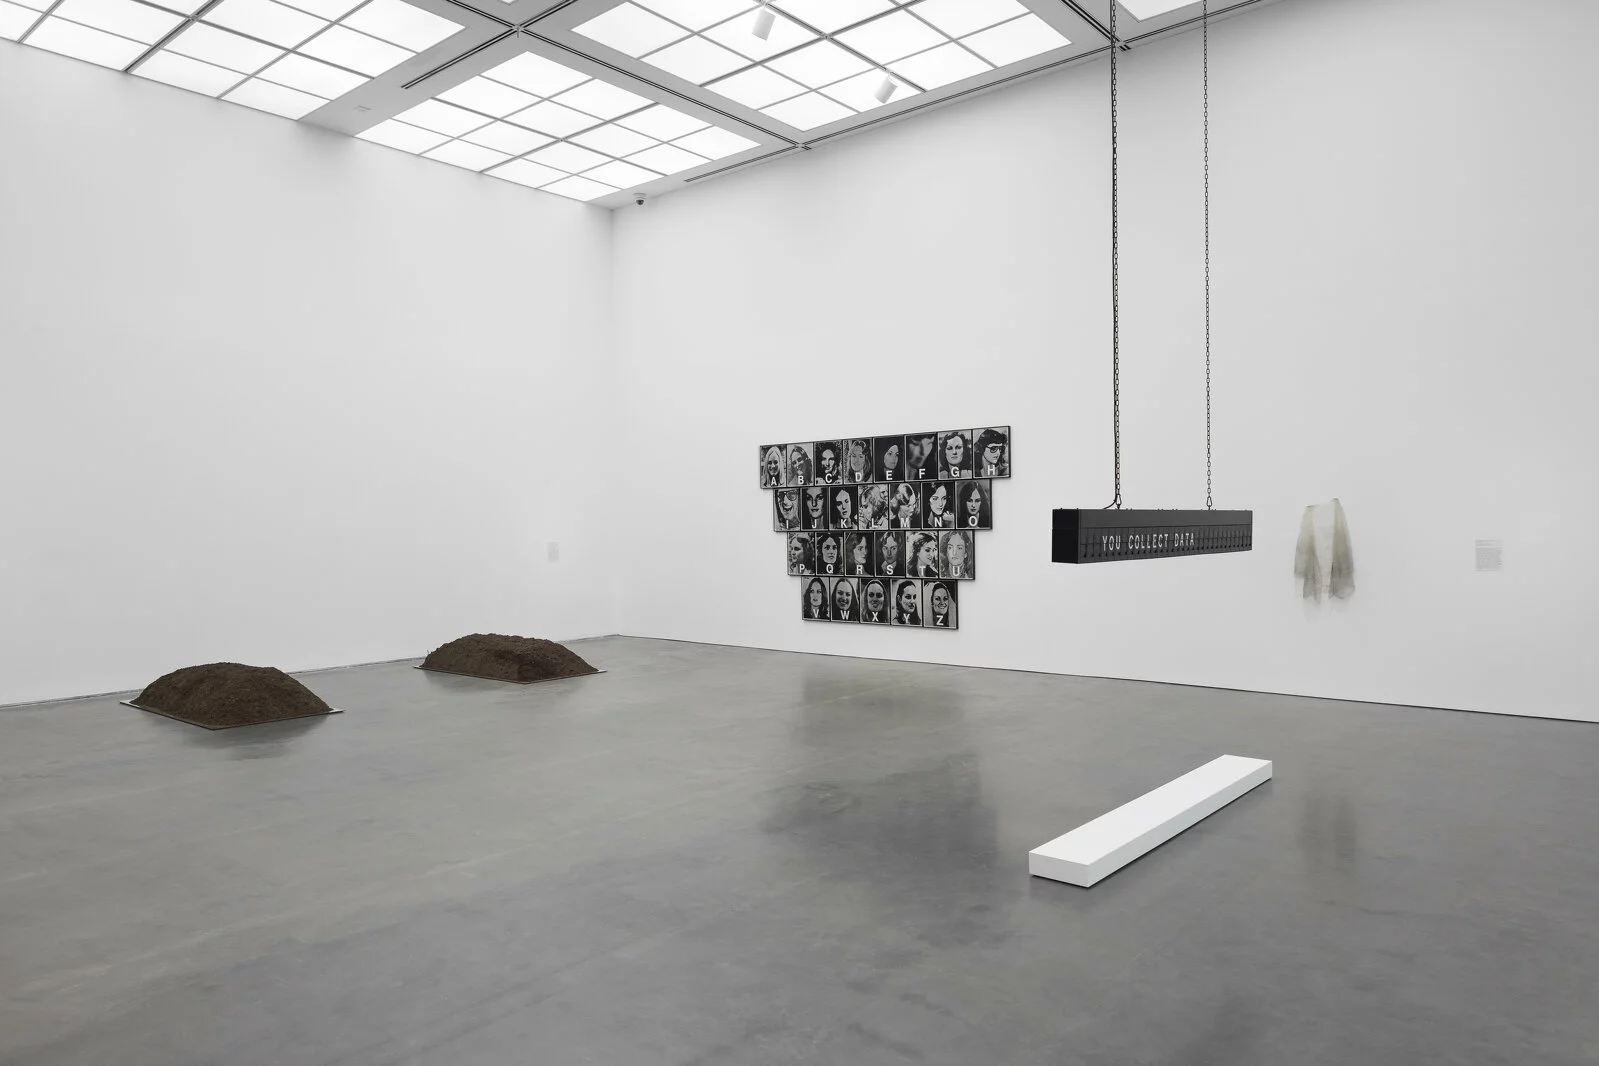 White-walled gallery space with four artworks visible. Two are hung on the wall; two are installations.